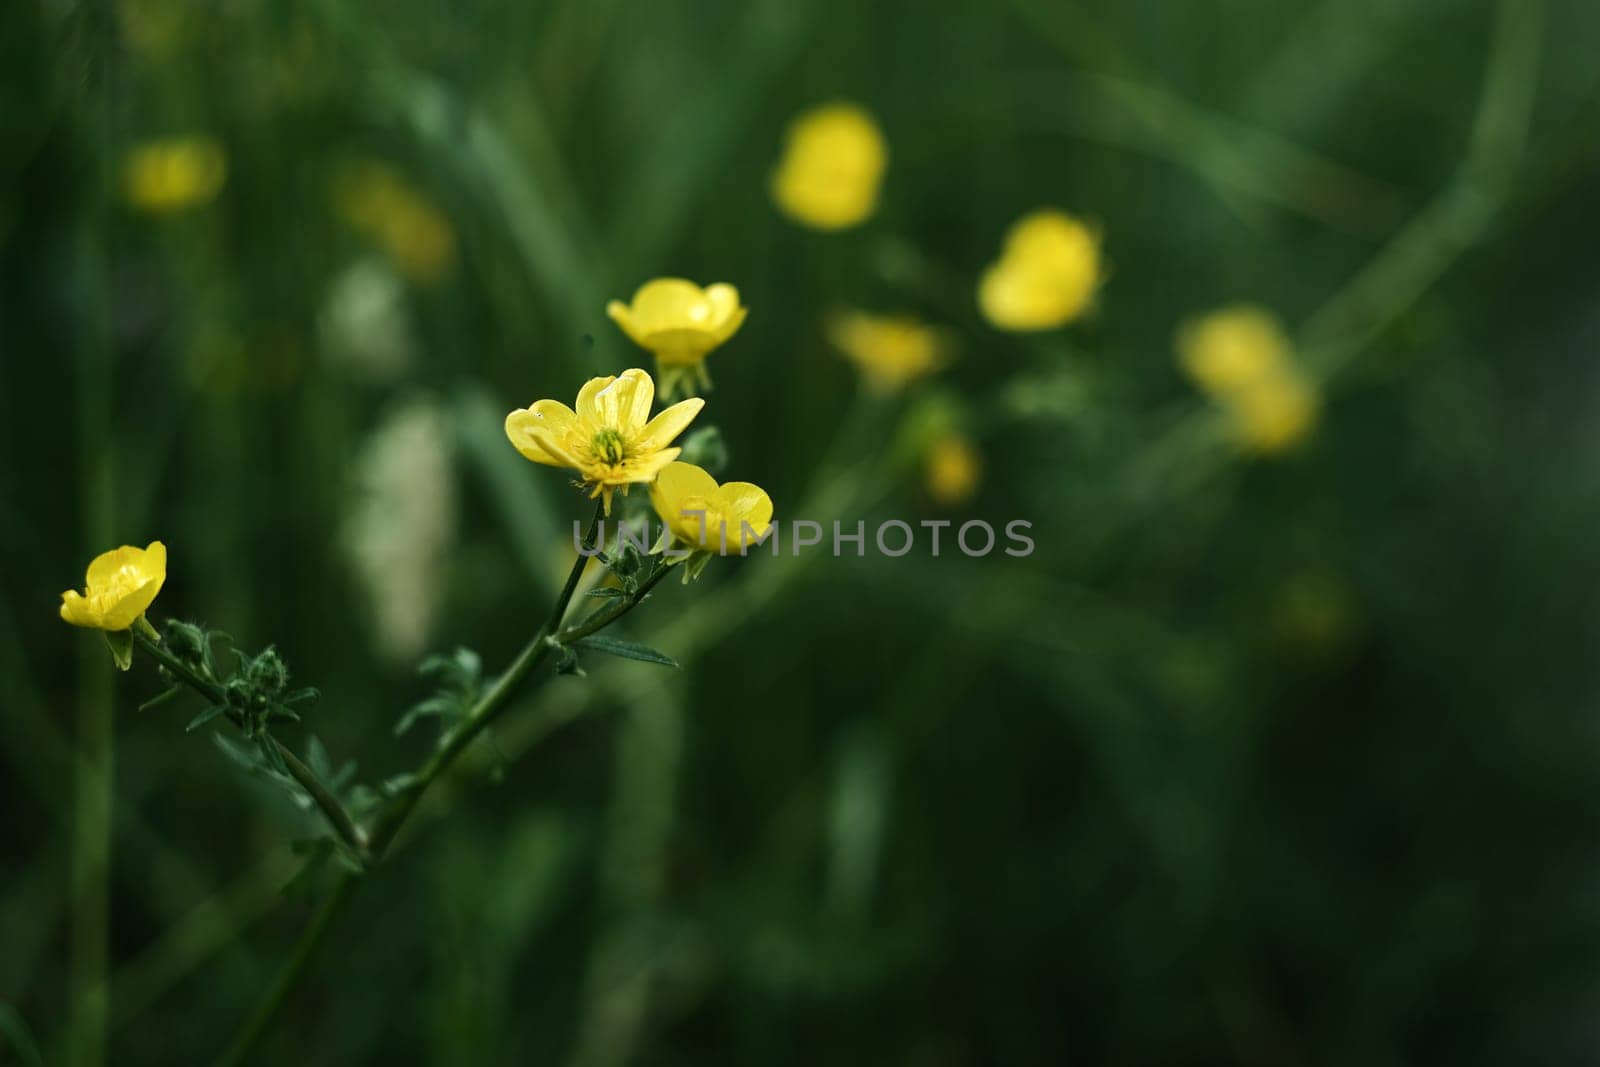 Buttercups wild flowers on a green blurred grass background. Yellow flowers in the field.